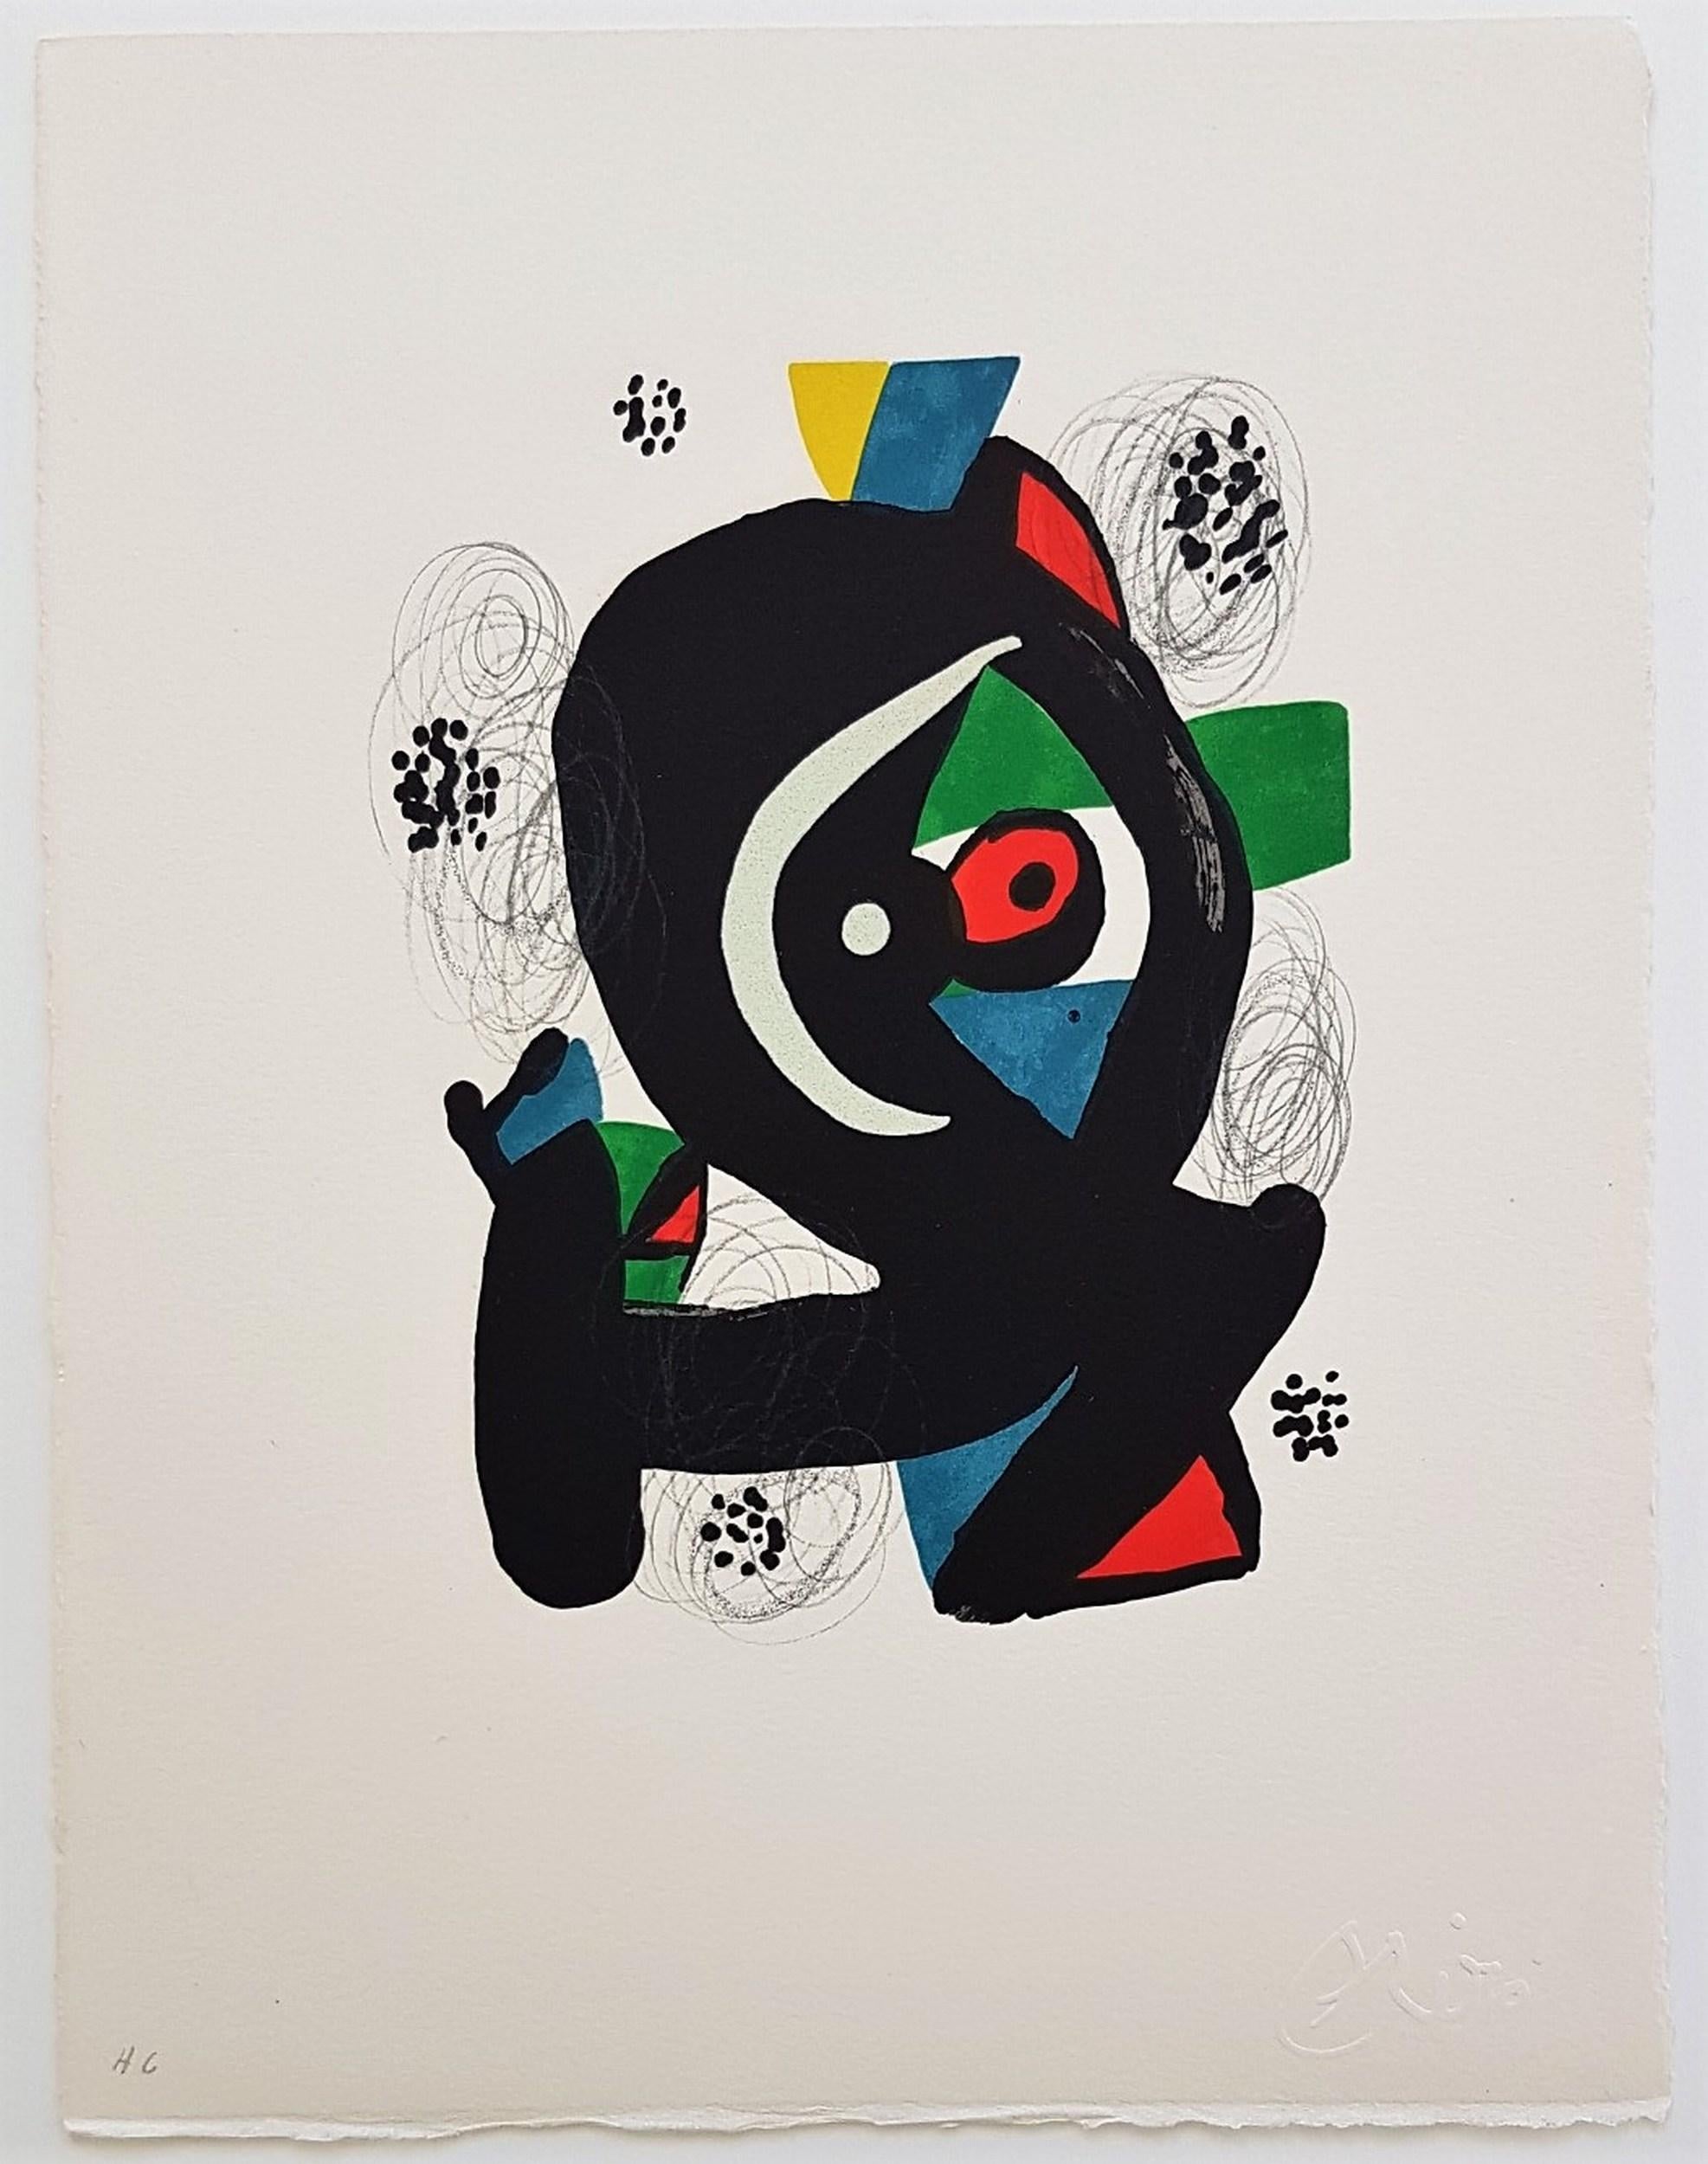 Joan Miró Abstract Print - La Mélodie Acide - 2 (42% OFF LIST PRICE & $10 OFF SHIPPING)